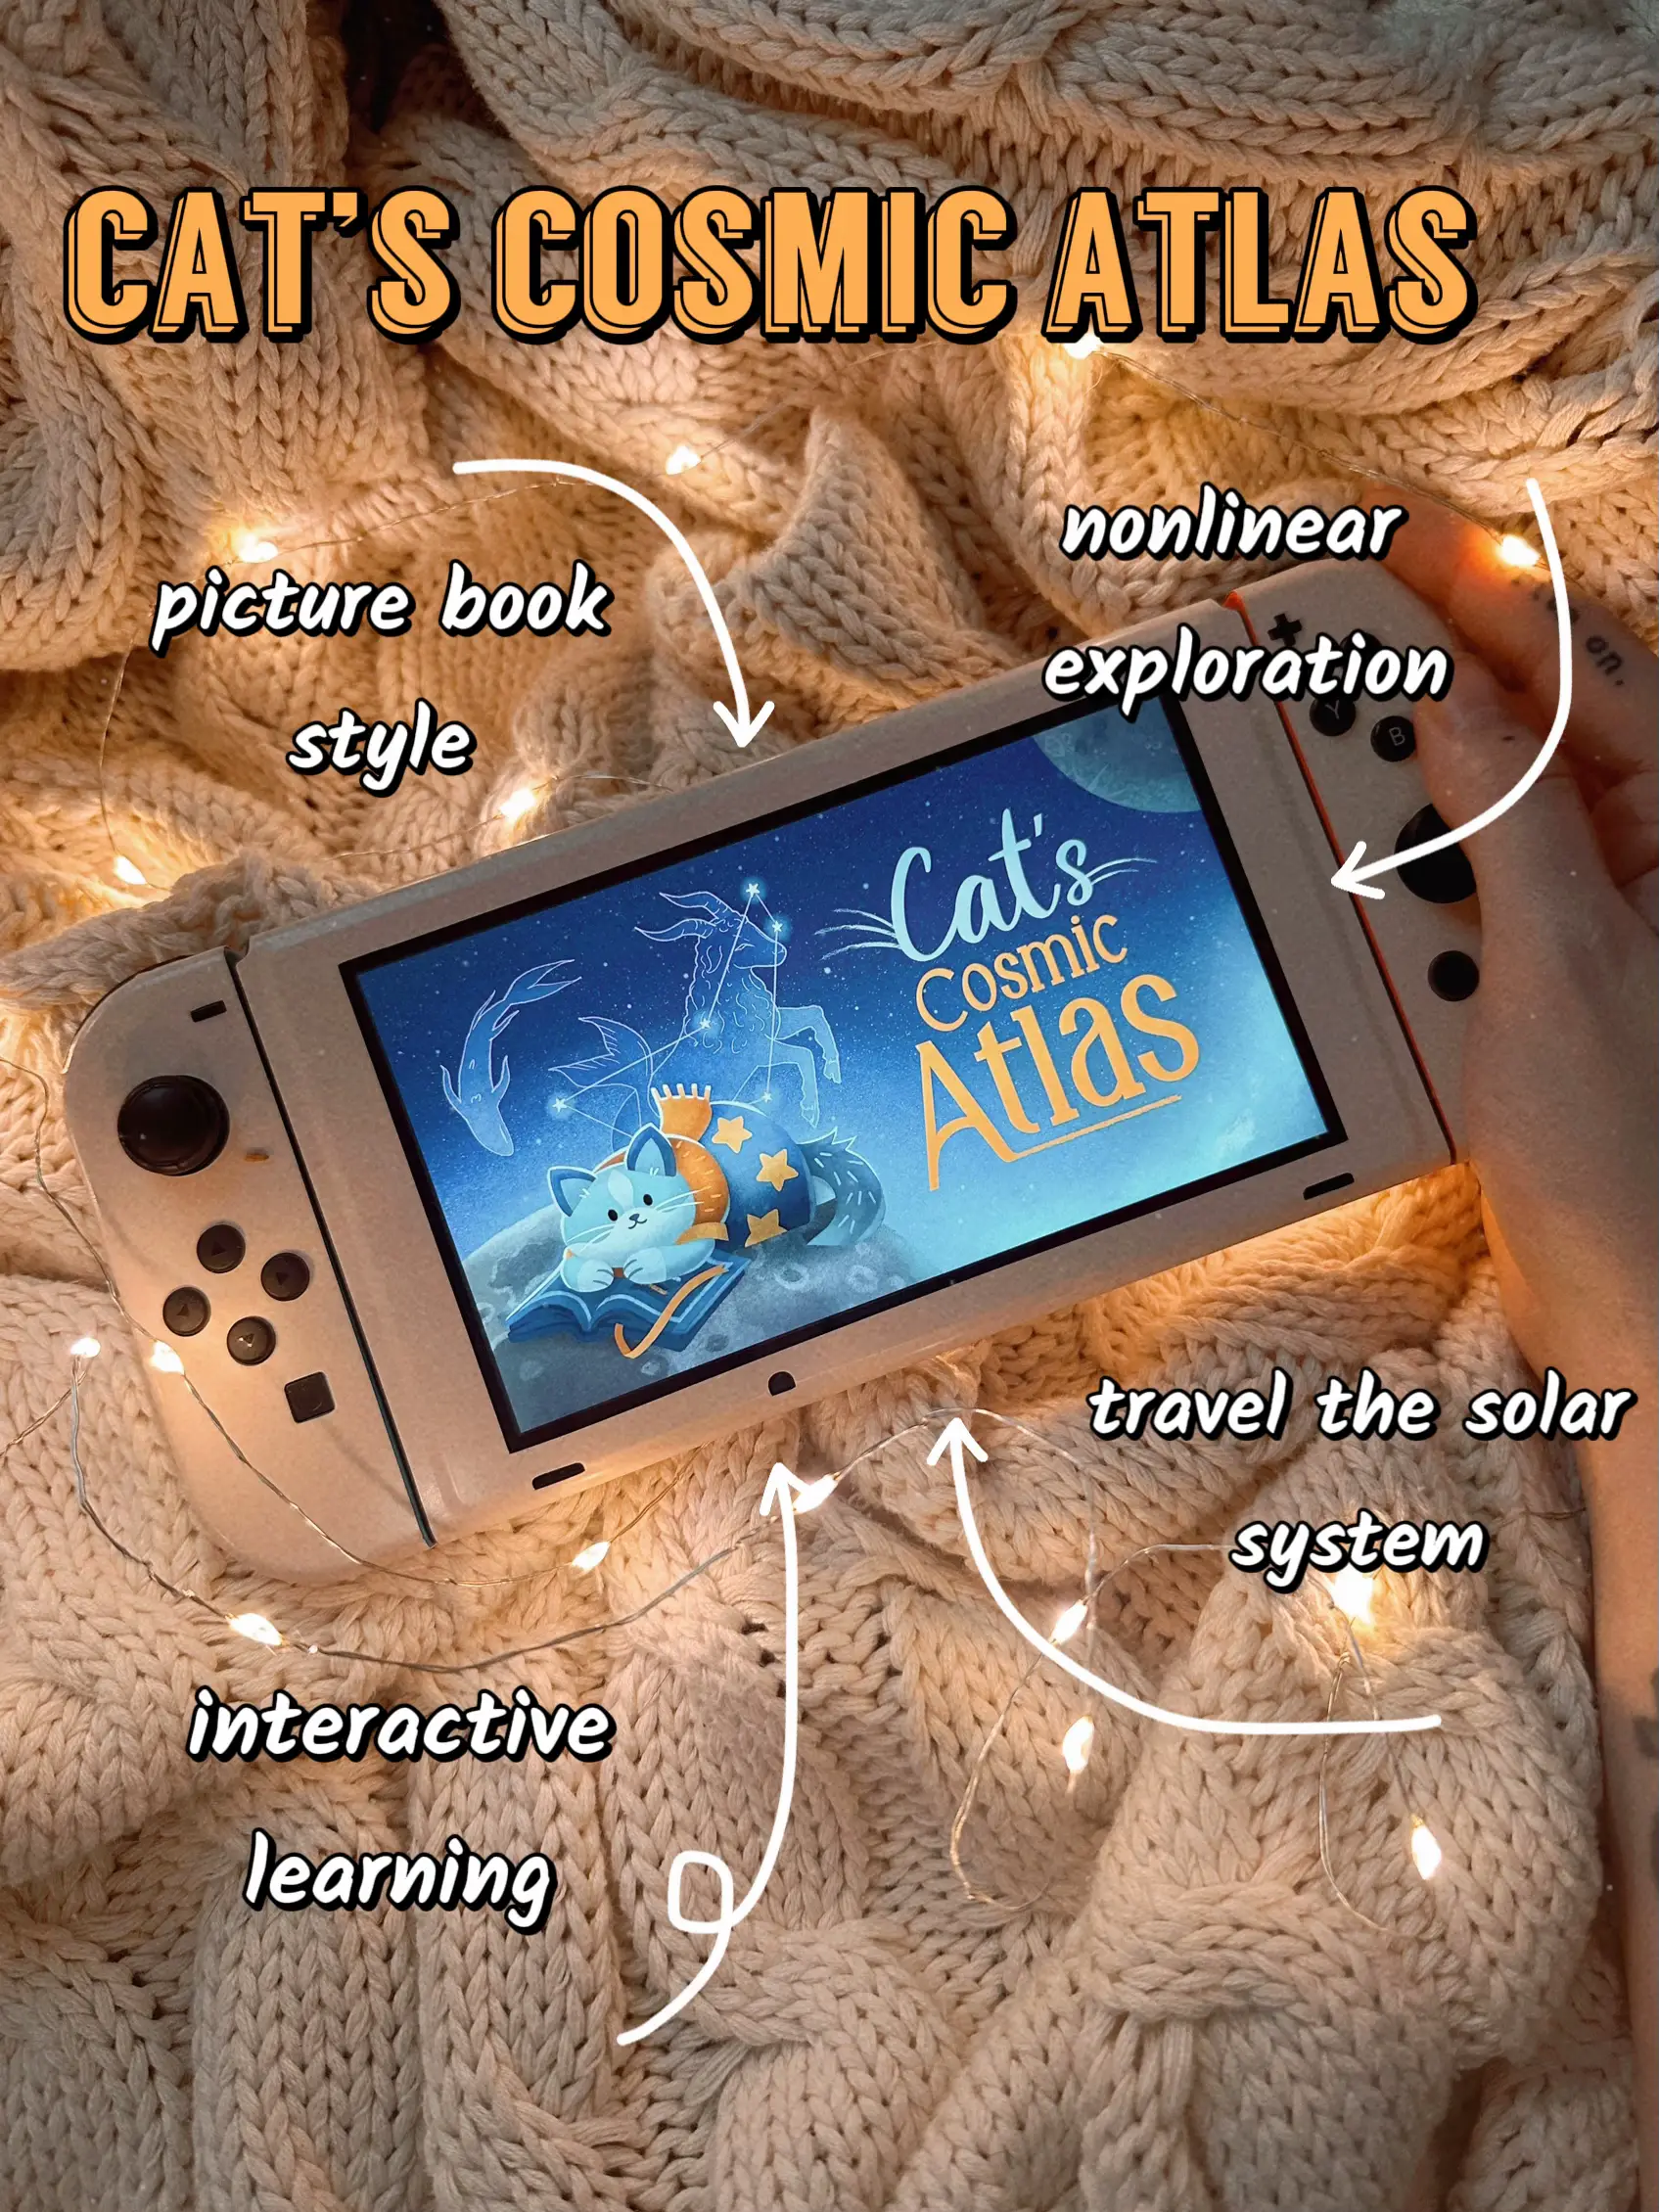  A hand holding a Nintendo Wii controller with a screen that says "Cats Cosmic Atlas".